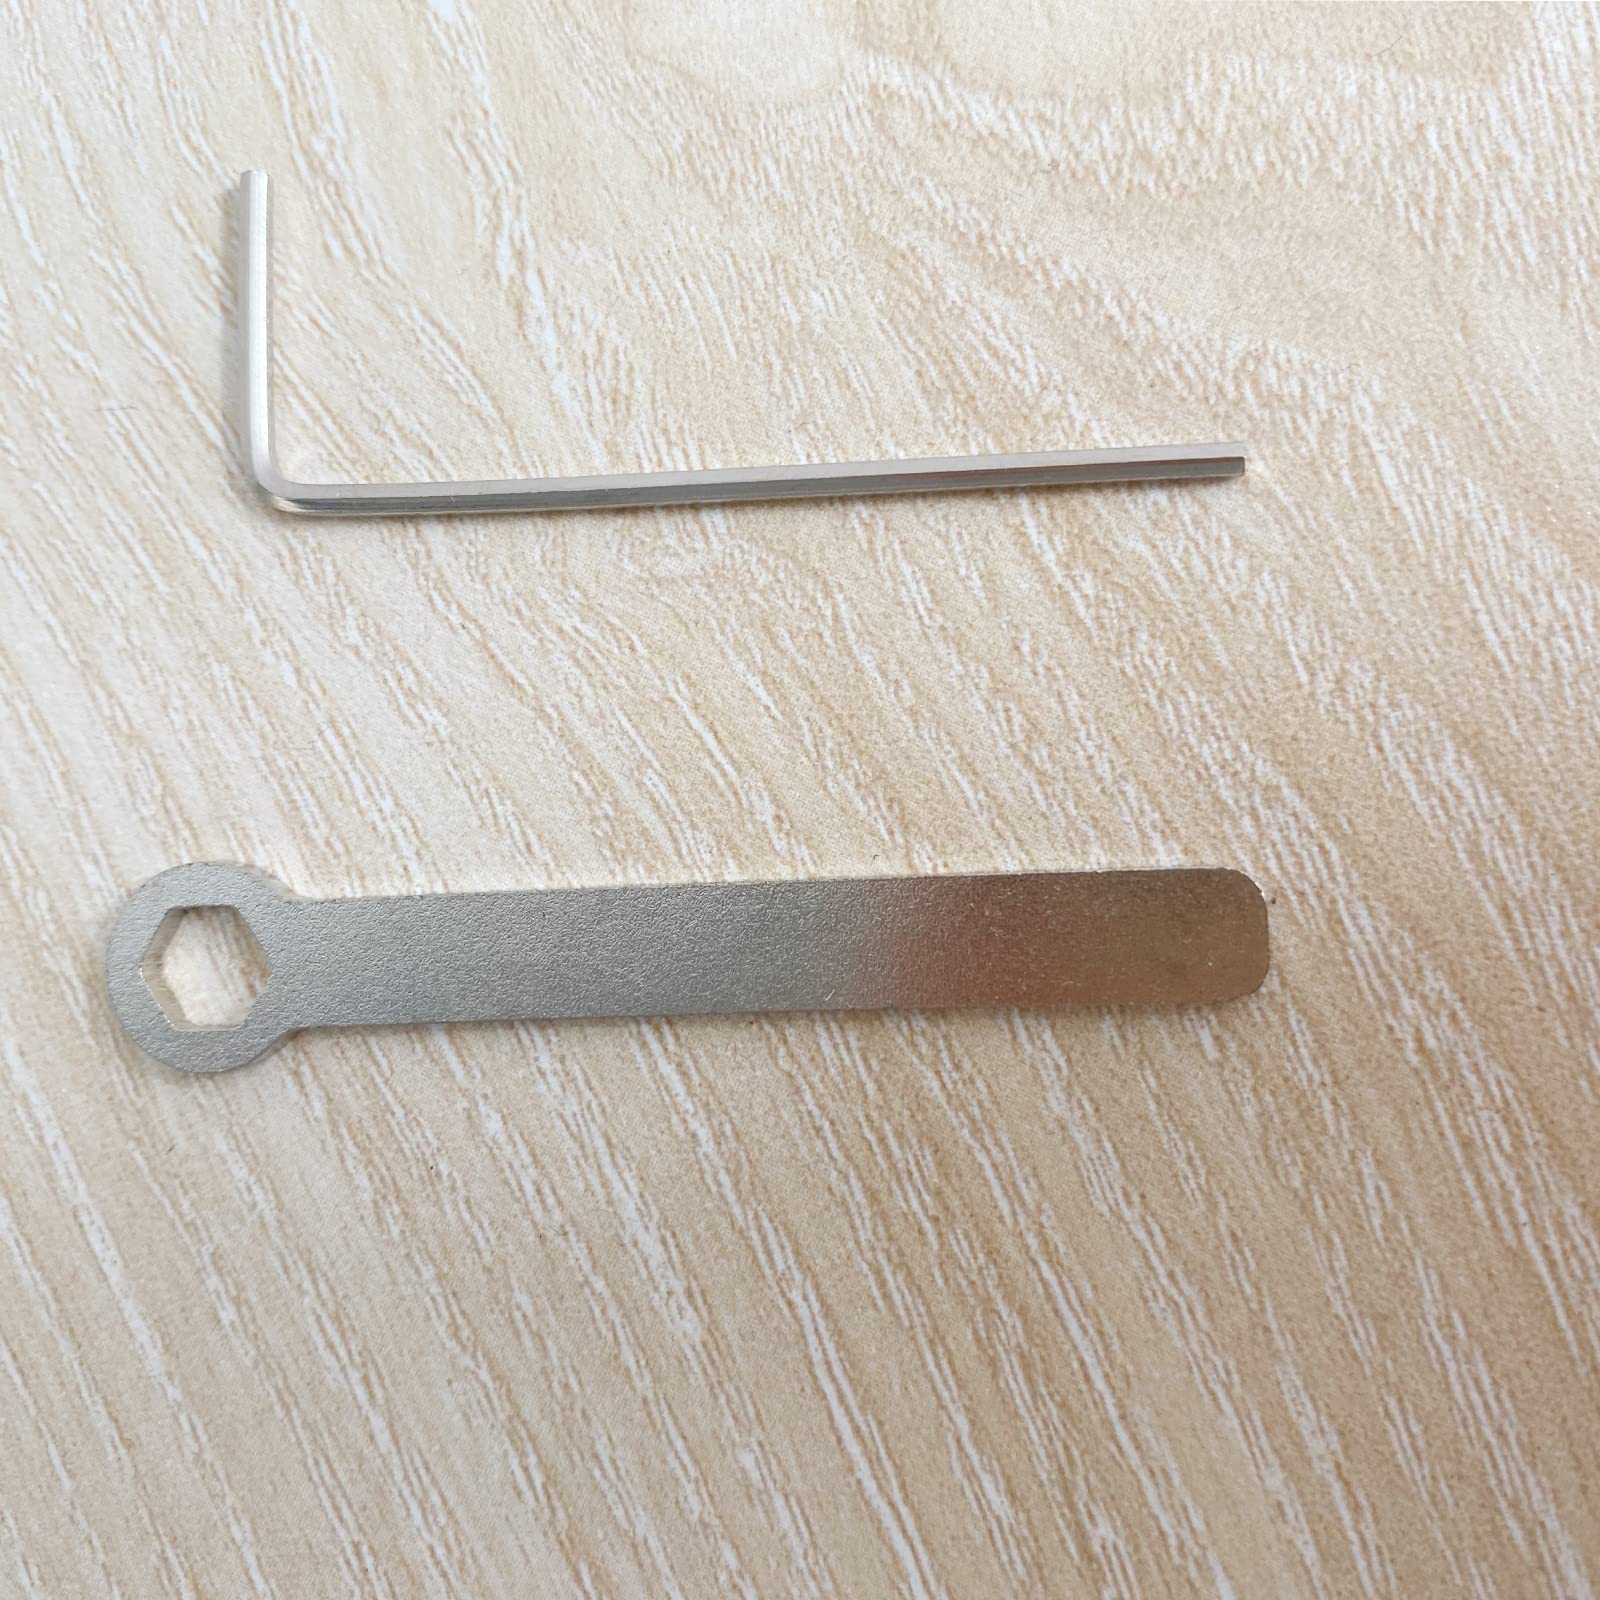 CW Keyer Wrench and Allen set, featuring a 5.5mm wrench and a 1.5mm hex key. Crafted from durable metal.